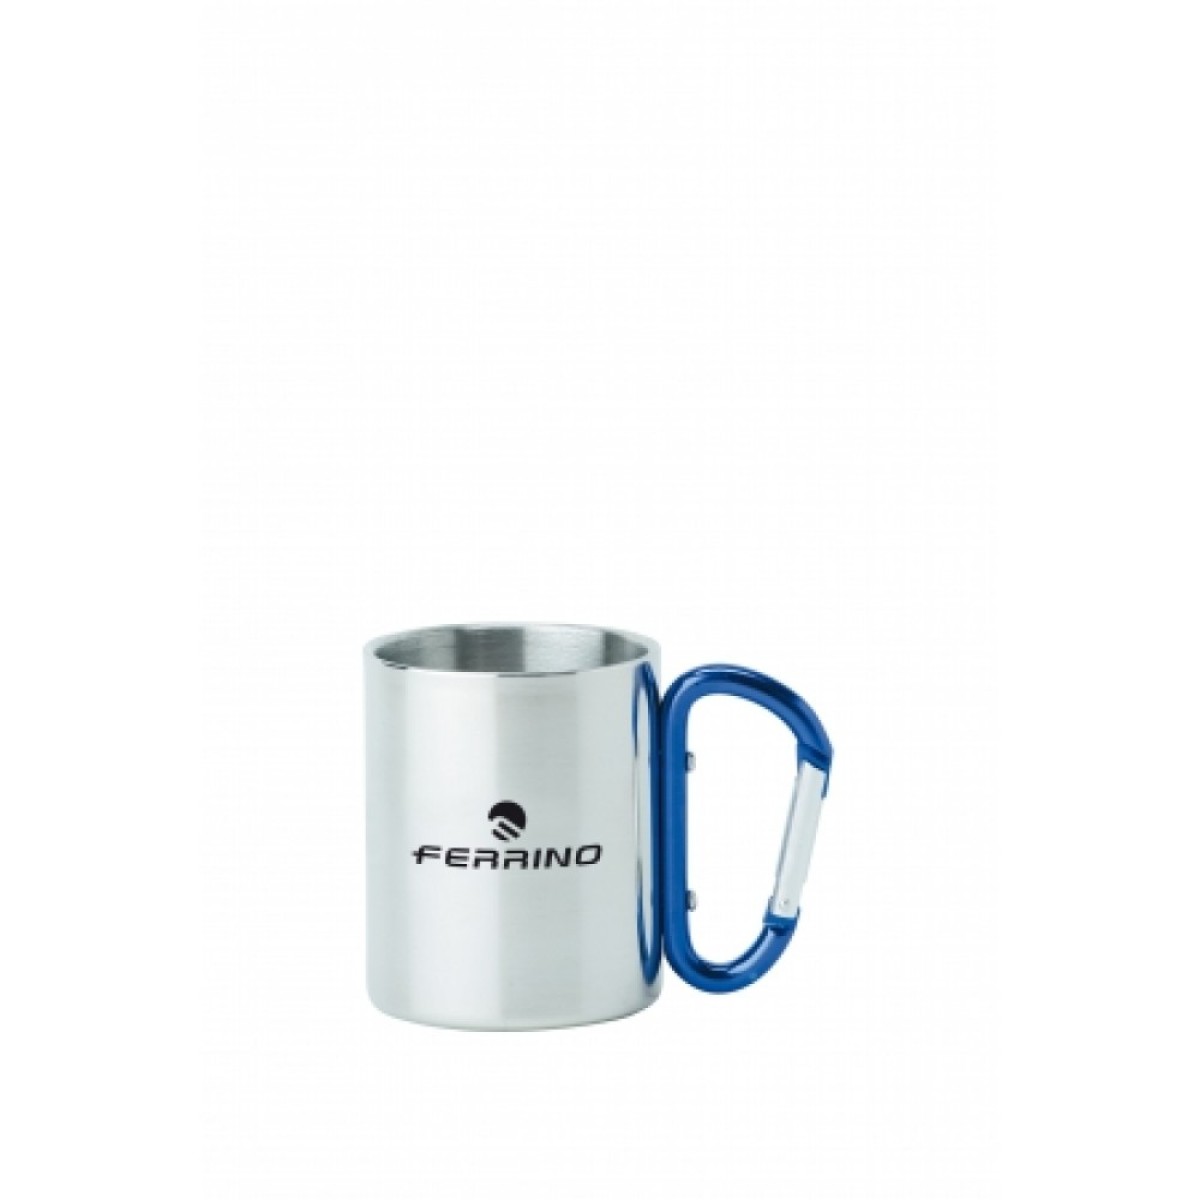 Stainless steel cup with carabiner FERRINO - view 1